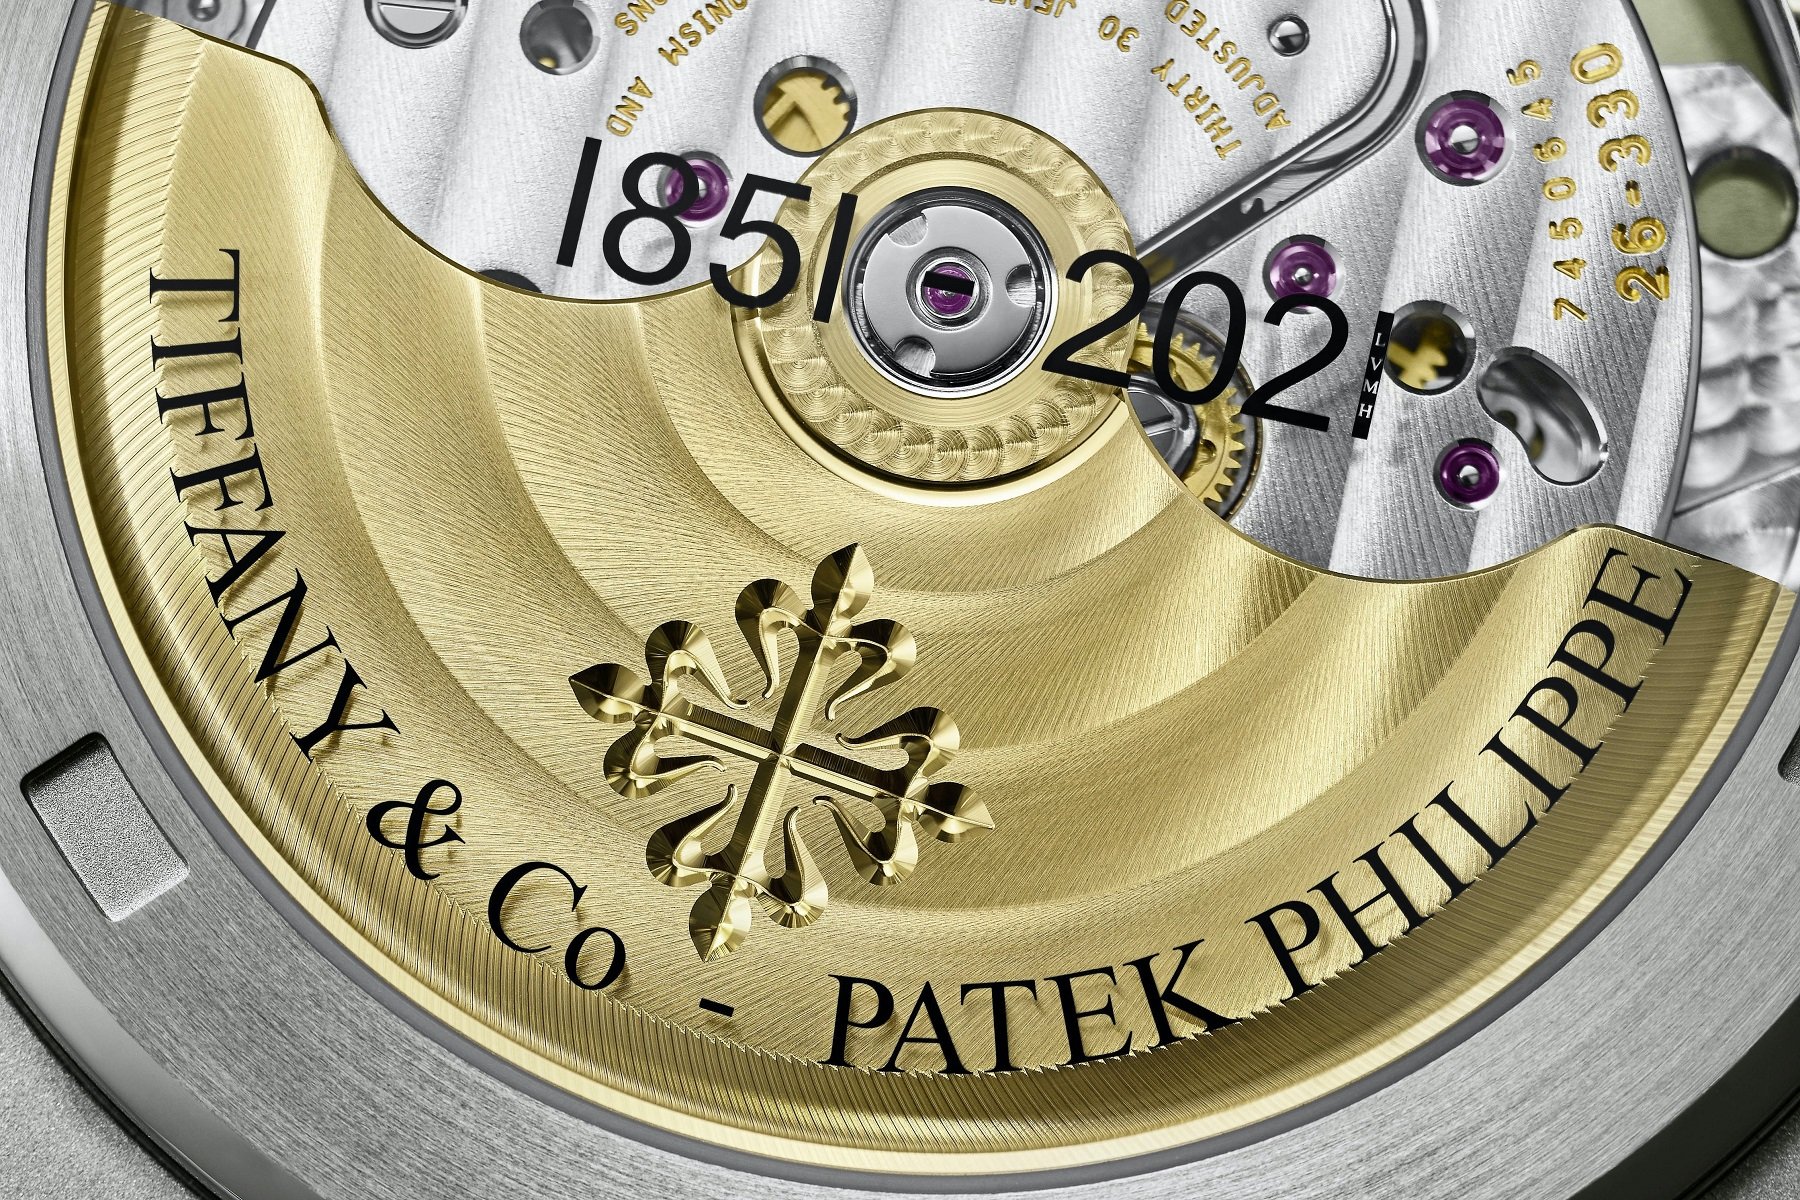 Patek Philippe Might Come Up For Sale - LVMH Moet Hennessy Louis